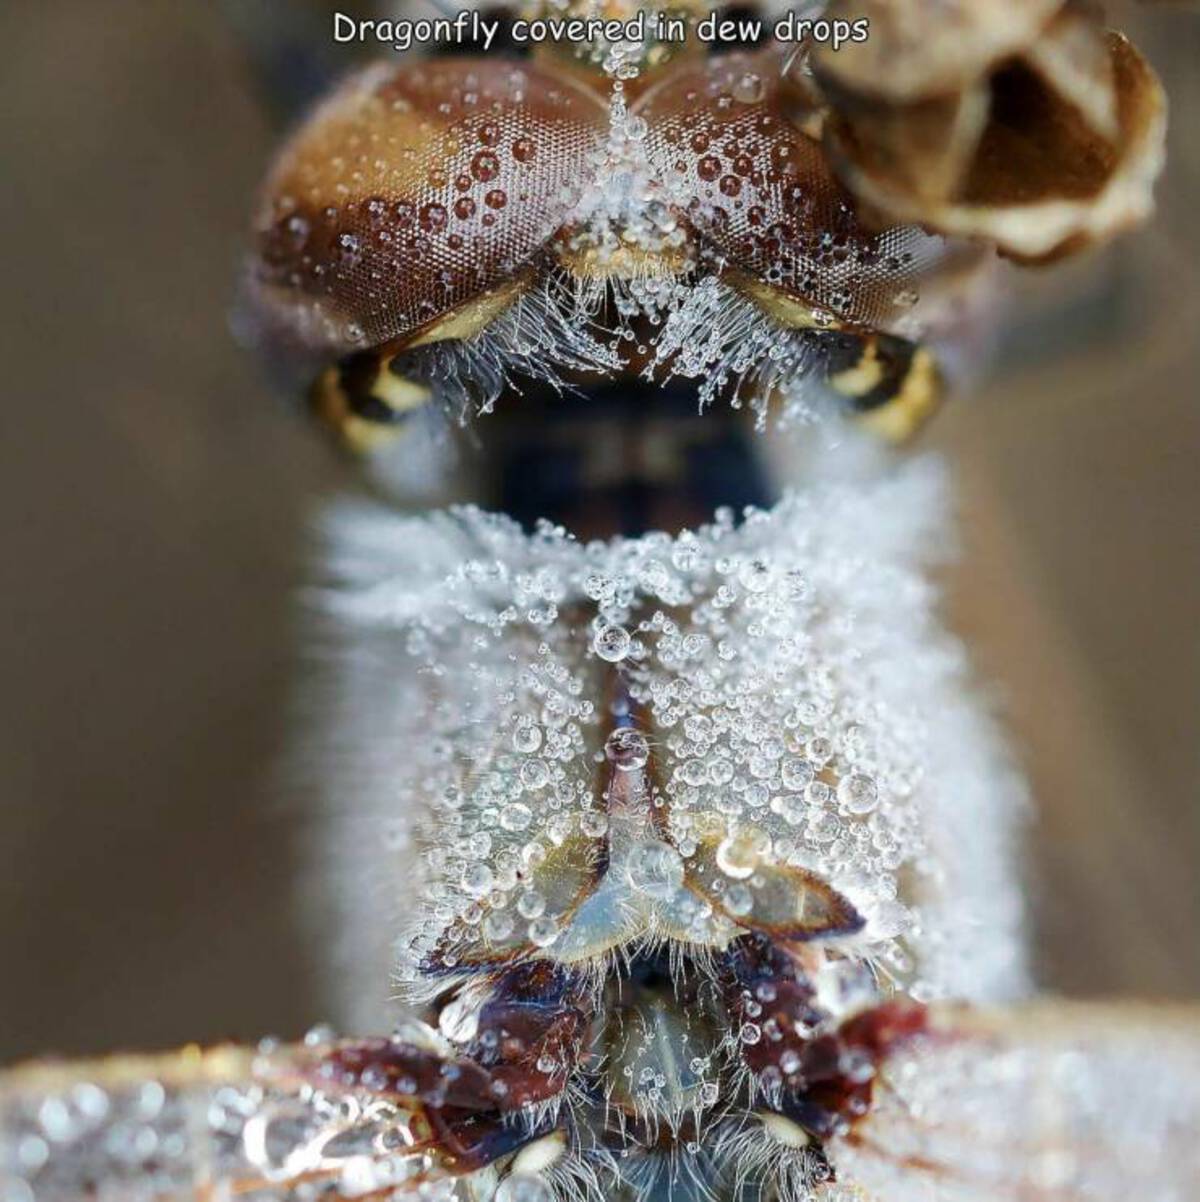 close up - Dragonfly covered in dew drops